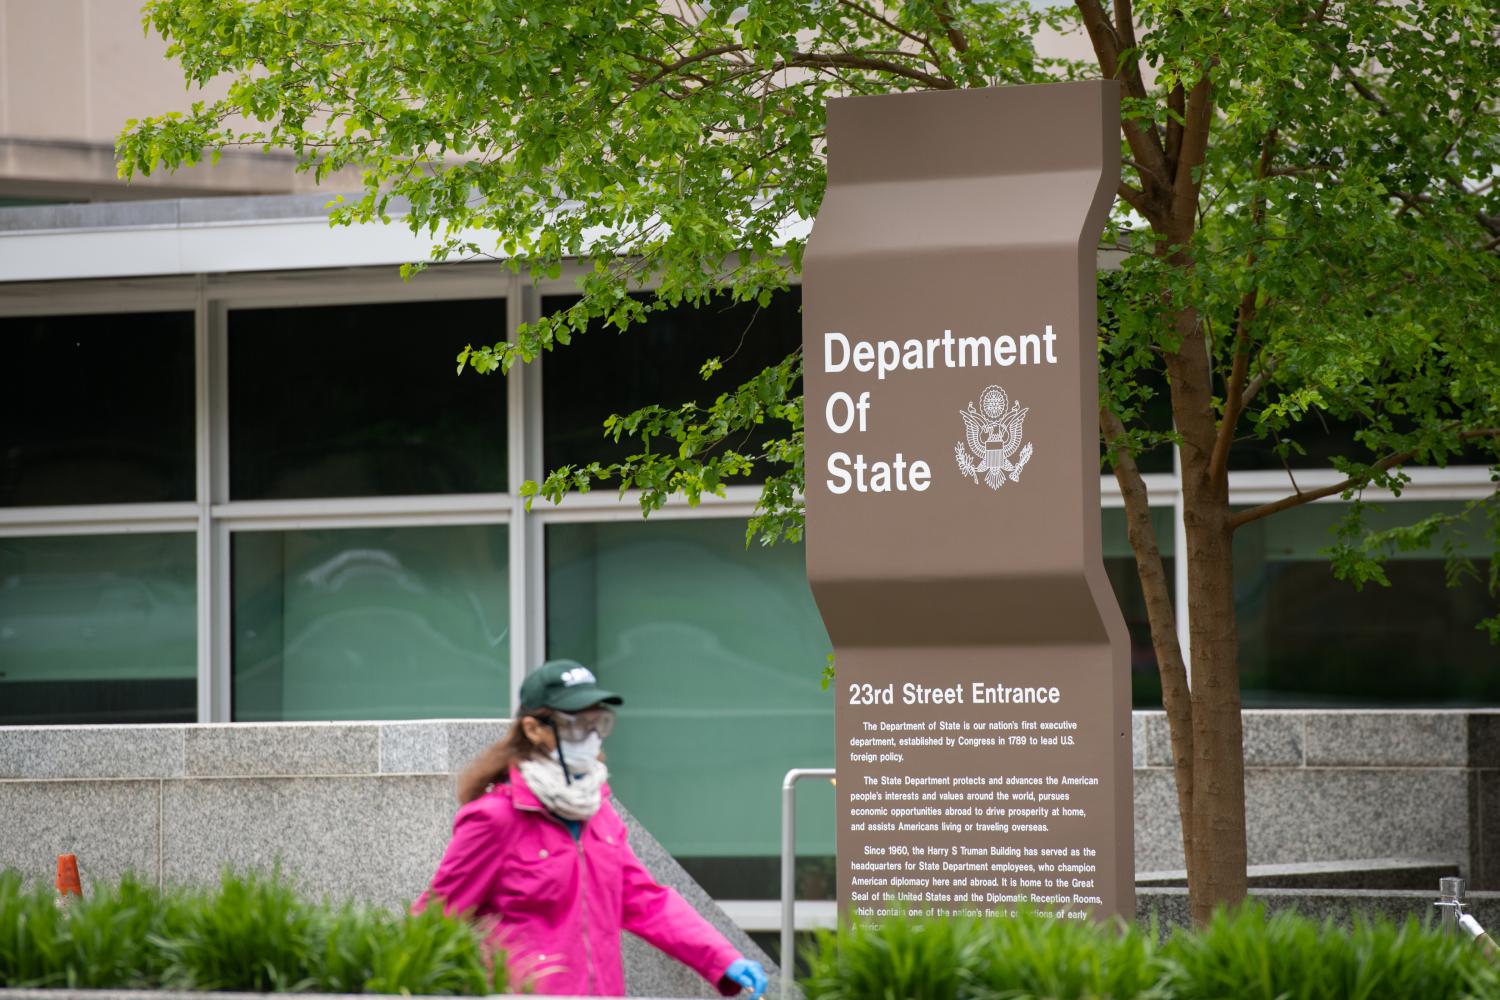 A pedestrian wearing gloves, goggles and a mask walks by the State Department in Washington, D.C. on April 23, 2020 amid the Coronavirus pandemic. After extended negotiations over an additional $500 billion in stimulus funding in response to the ongoing COVID-19 outbreak, the U.S. Congress is set send another economic relief bill to President Trump to sign into law after a House vote later today. (Graeme Sloan/Sipa USA)No Use UK. No Use Germany.